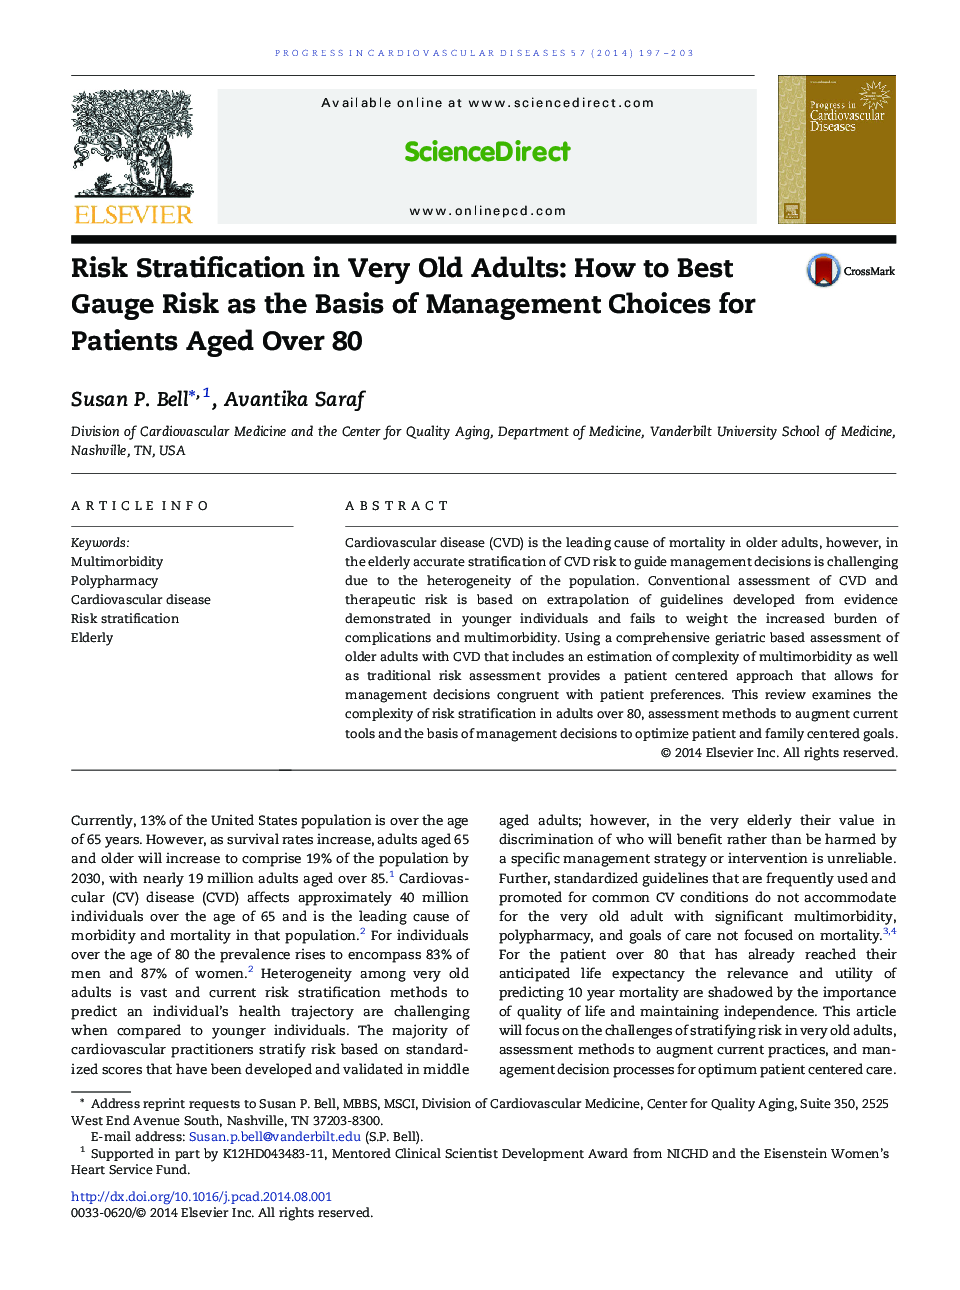 Risk Stratification in Very Old Adults: How to Best Gauge Risk as the Basis of Management Choices for Patients Aged Over 80